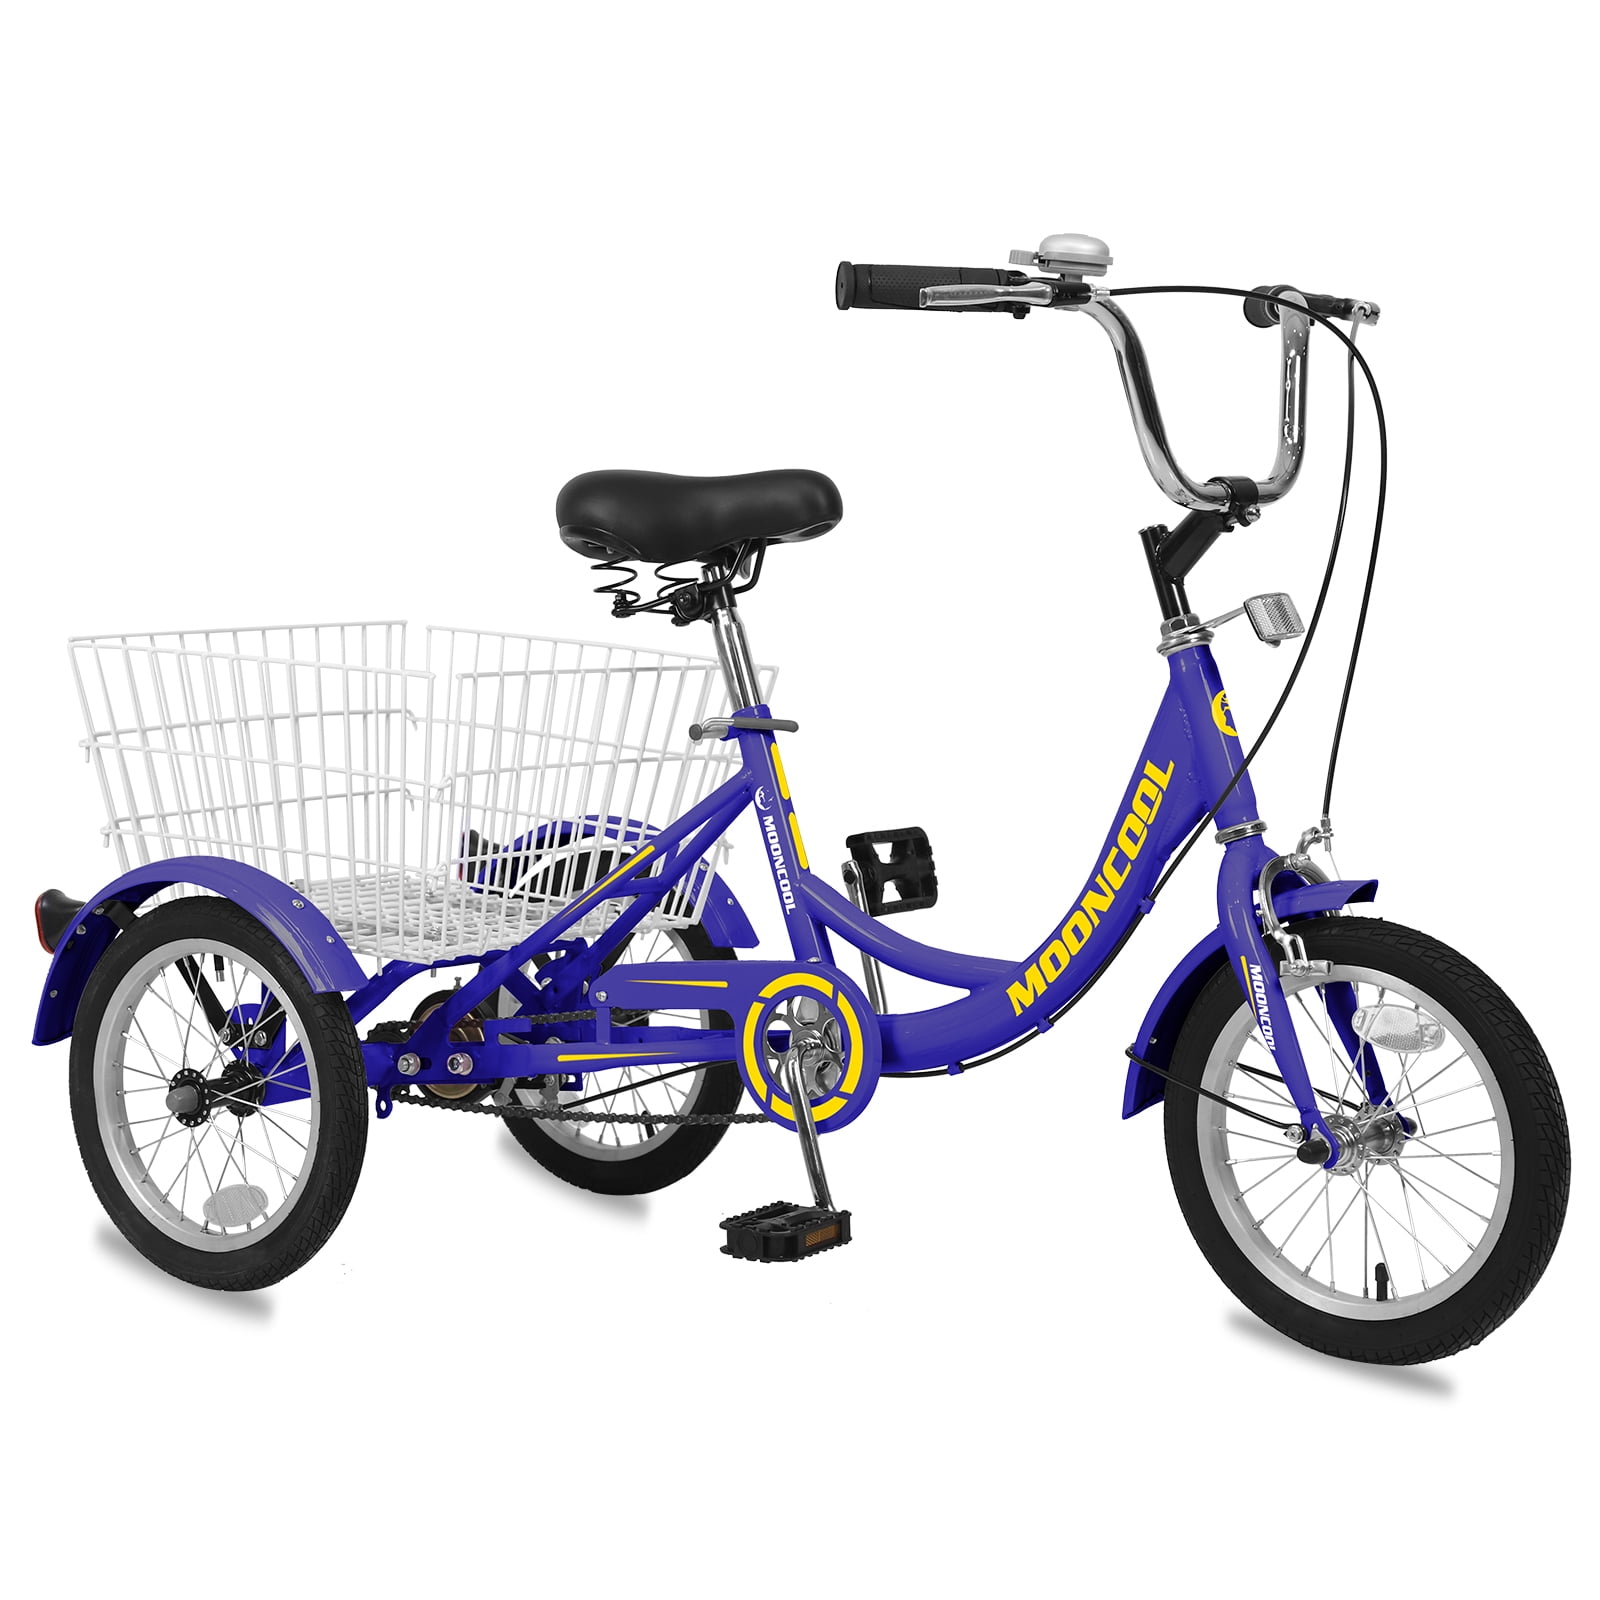 Teenager Tricycle 16 inch 3 Wheel Bicycle Cruiser Bike 15 Colors with Basket New 